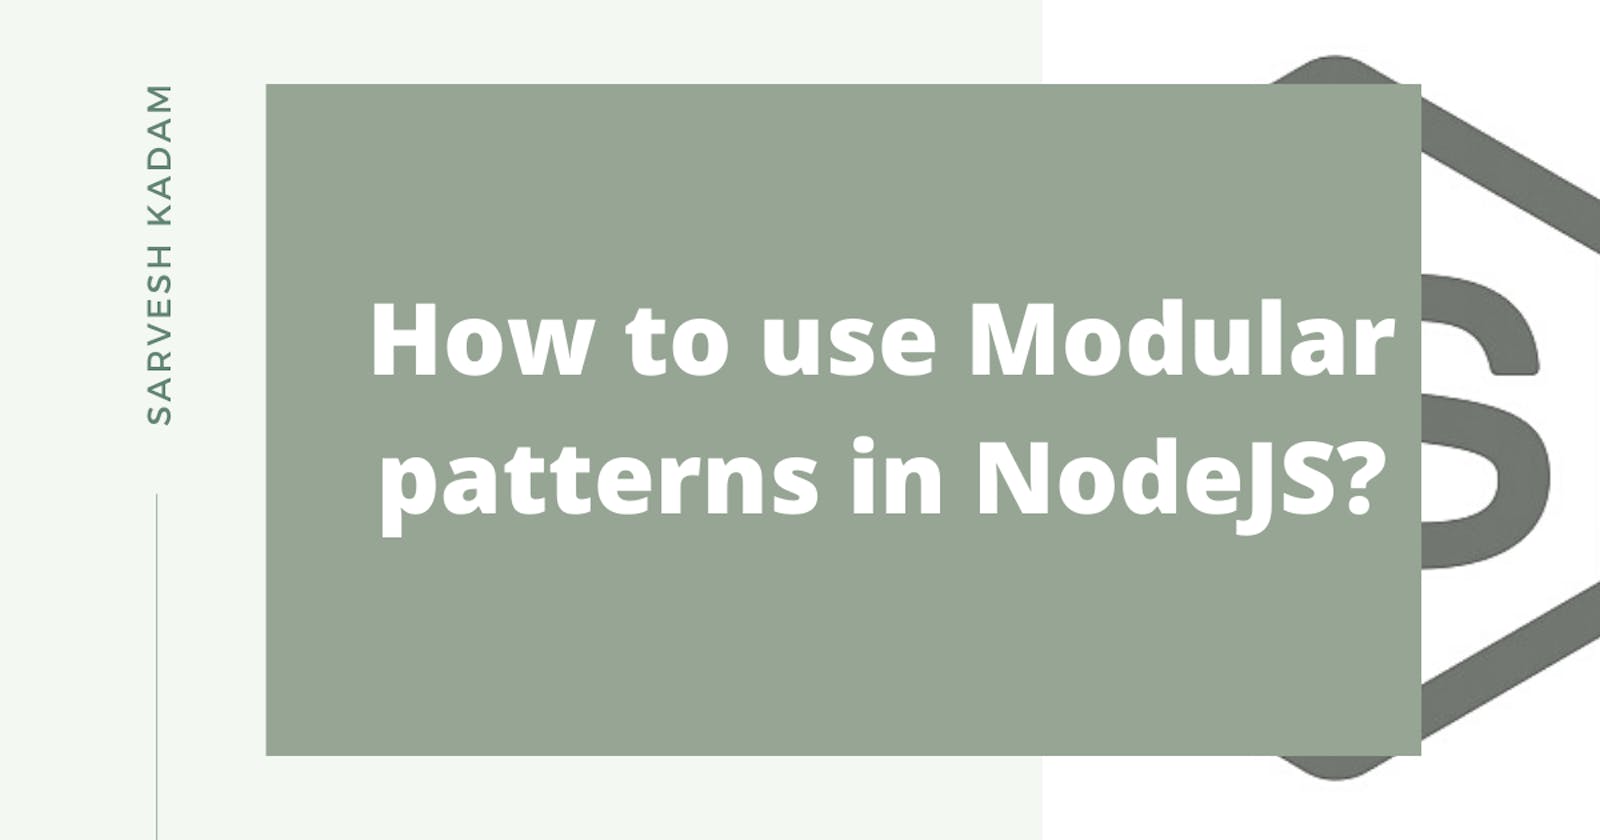 How to use Modular patterns in NodeJS?